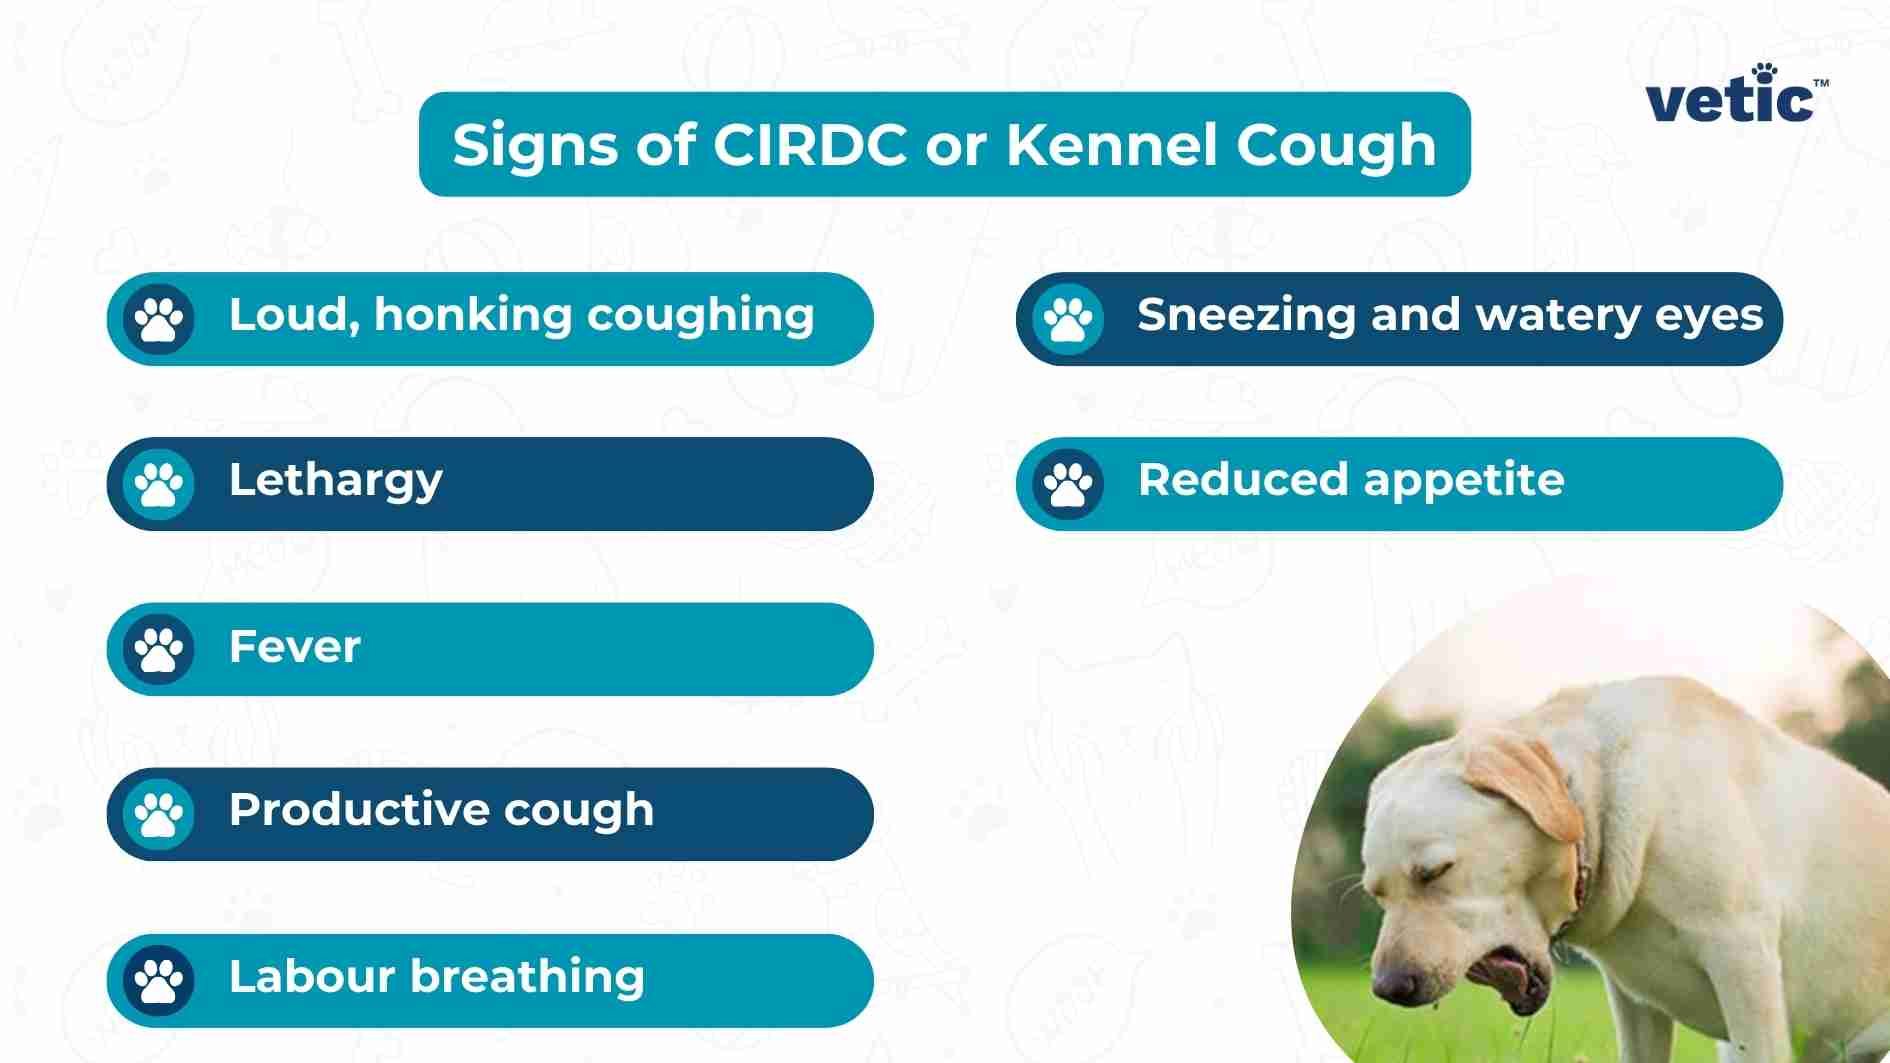 An informational graphic listing the signs of CIRDC or Kennel Cough in dogs, with a picture of a dog on the right side. Description: The image is an educational graphic about the signs of CIRDC (Canine Infectious Respiratory Disease Complex), also known as Kennel Cough. It features a list of eight symptoms, each accompanied by a paw print icon: Loud, honking cough Lethargy Fever Productive cough Labored breathing Sneezing and watery eyes Reduced appetite The title “Signs of CIRDC or Kennel Cough” is displayed prominently at the top, with the ‘vetic’ logo in the top right corner. A light-colored dog appears on the right side of the graphic, seemingly sneezing or coughing.